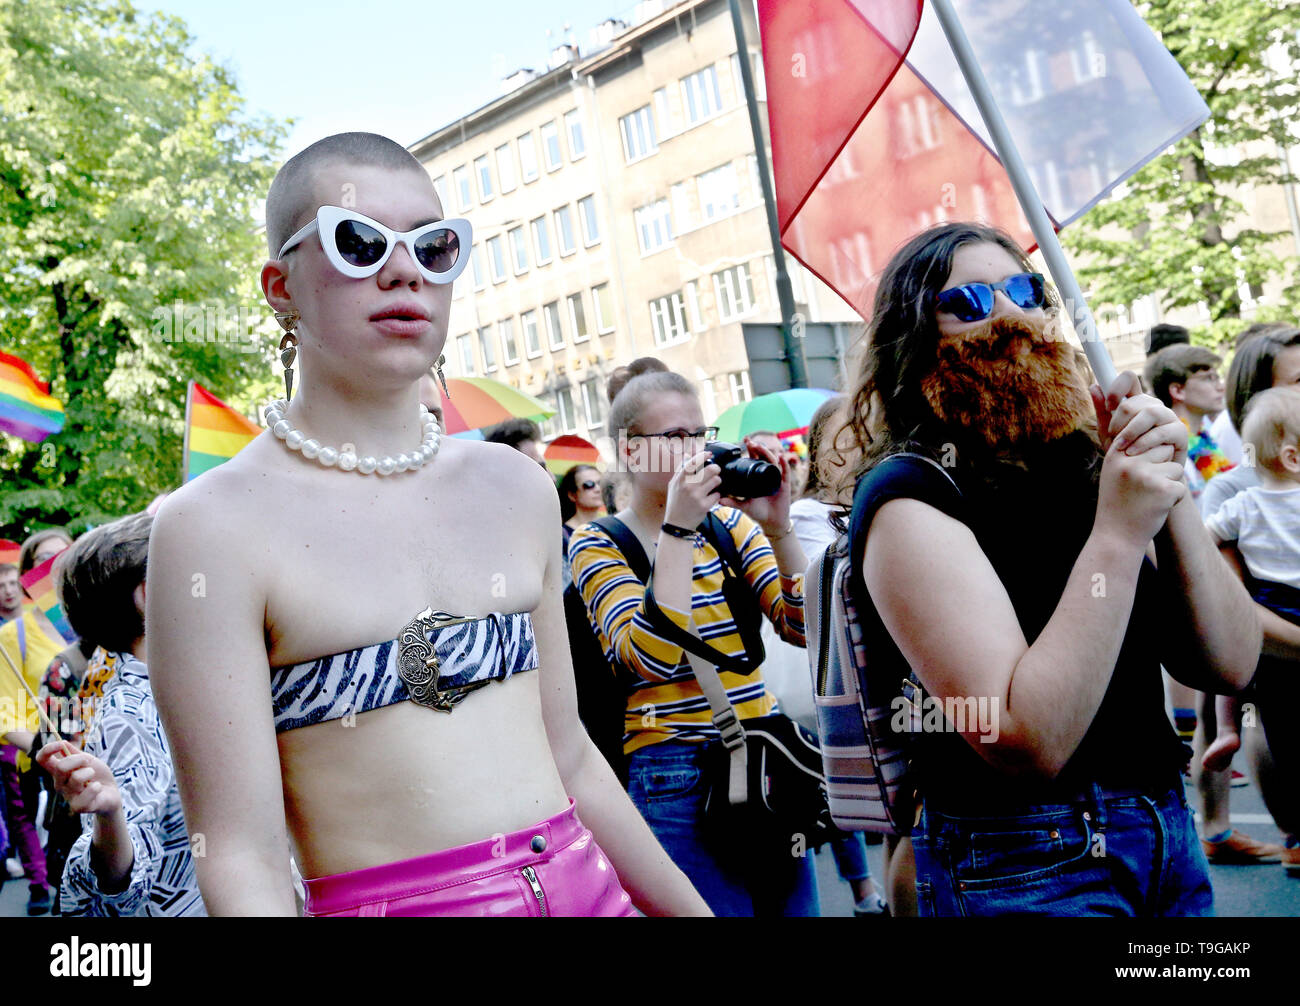 People are seen during the Equality March in Krakow. LGBT people and their supporters walk through the streets of Krakow to celebrate diversity and tolerance and express their opposition to discrimination and exclusion. The march was met in the city center by anti LGBT protesters from the far right organizations. Stock Photo